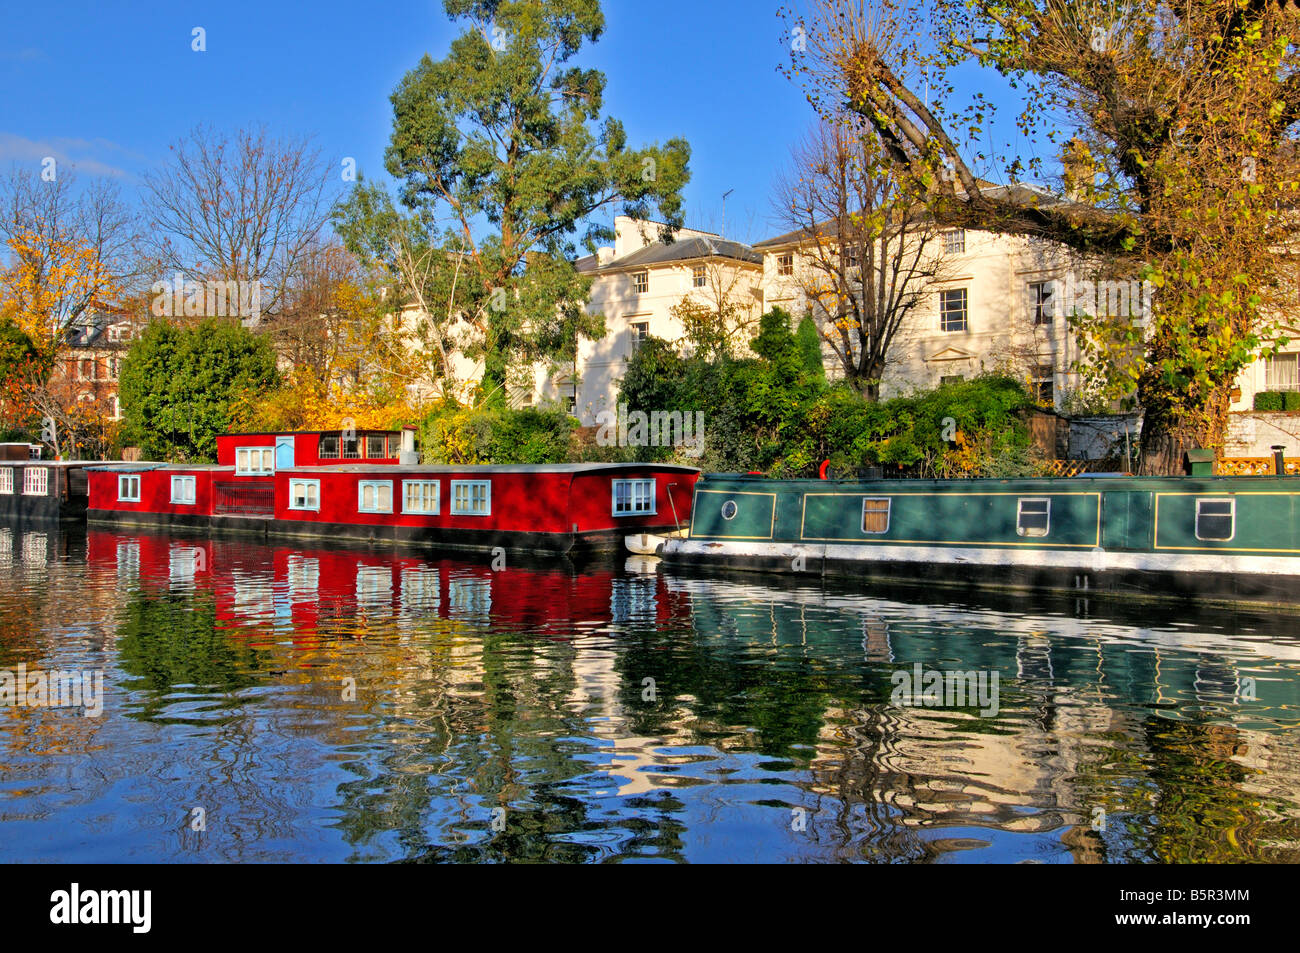 Houseboats and Barges on the Paddington Arm of the Grand Union canal close to Little Venice near Maida Vale London United Kingdom Stock Photo